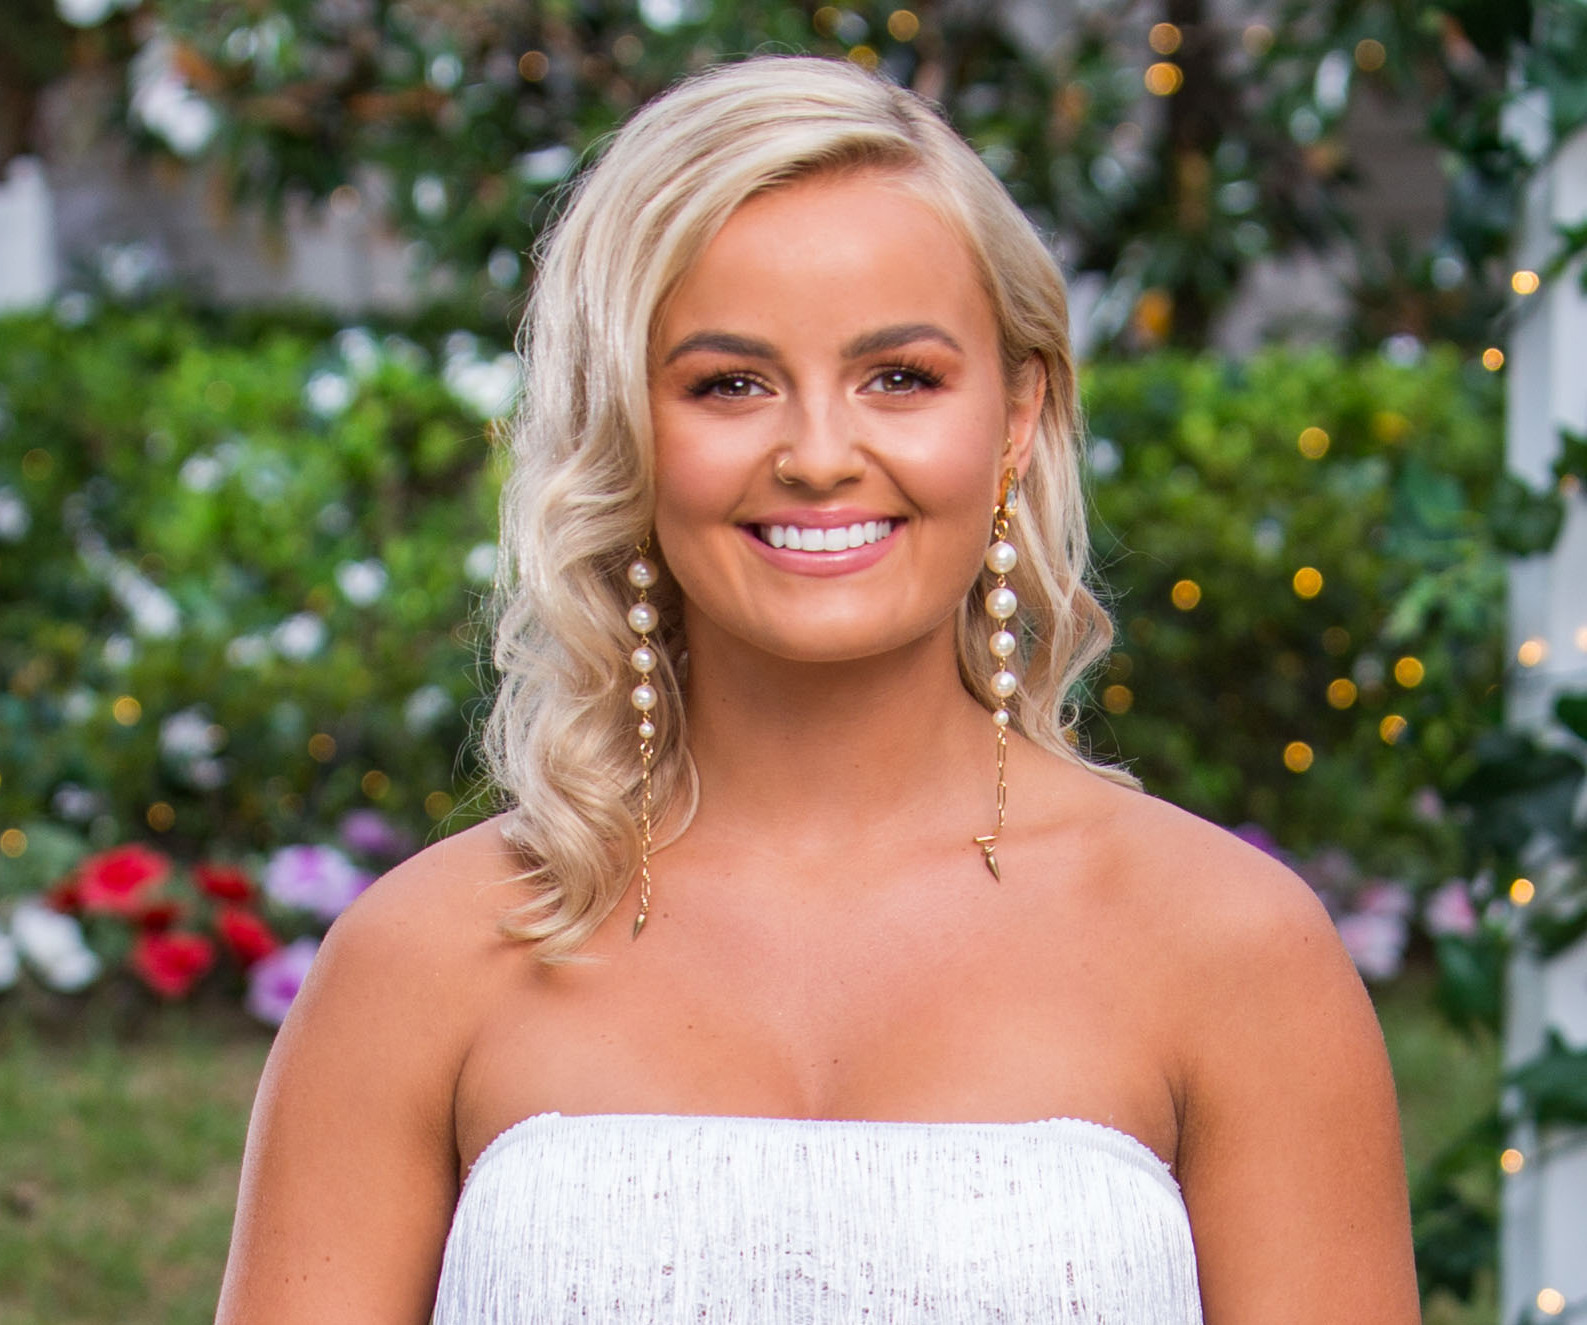 The Bachelor 2019: Meet Elly Miles, the gorgeous nurse who could steal Matt’s heart